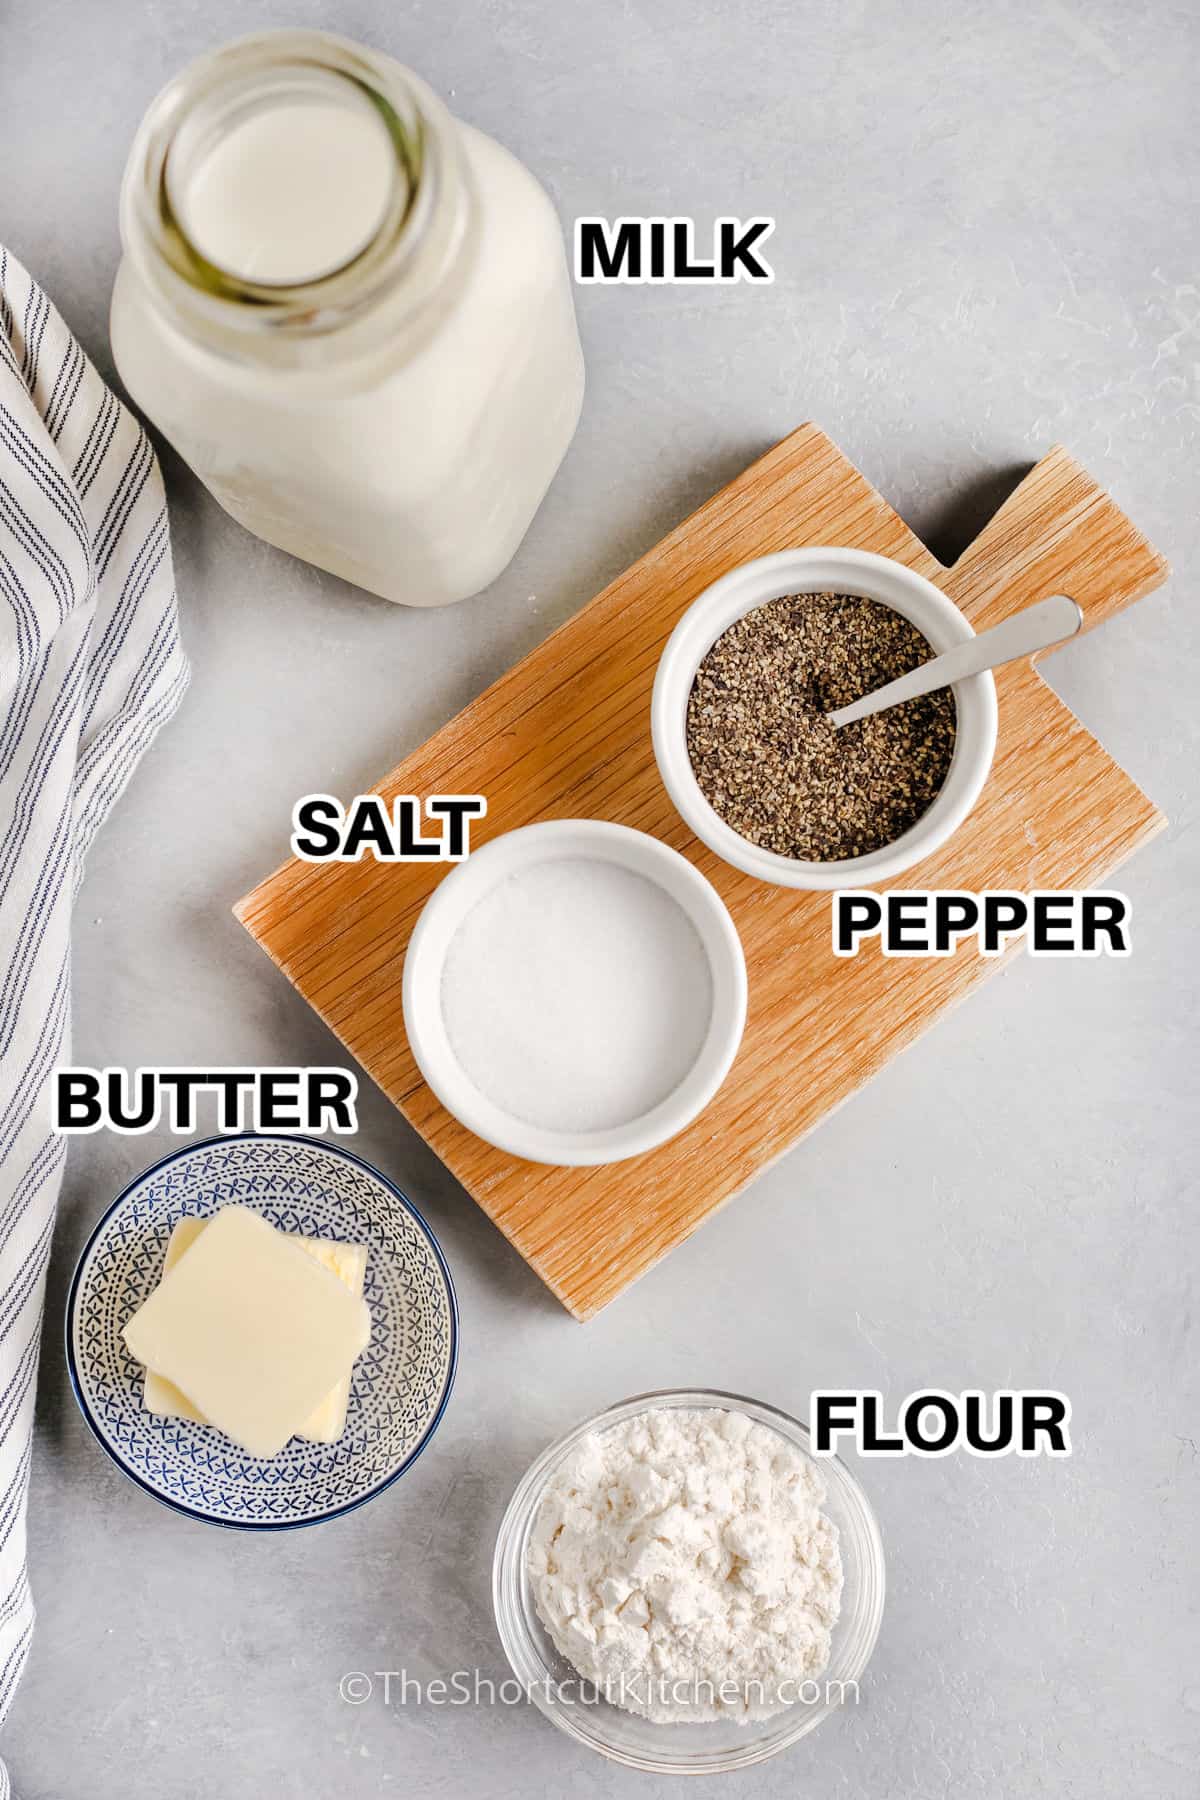 milk , salt and pepper , butter and flour with labels to make Pepper Gravy